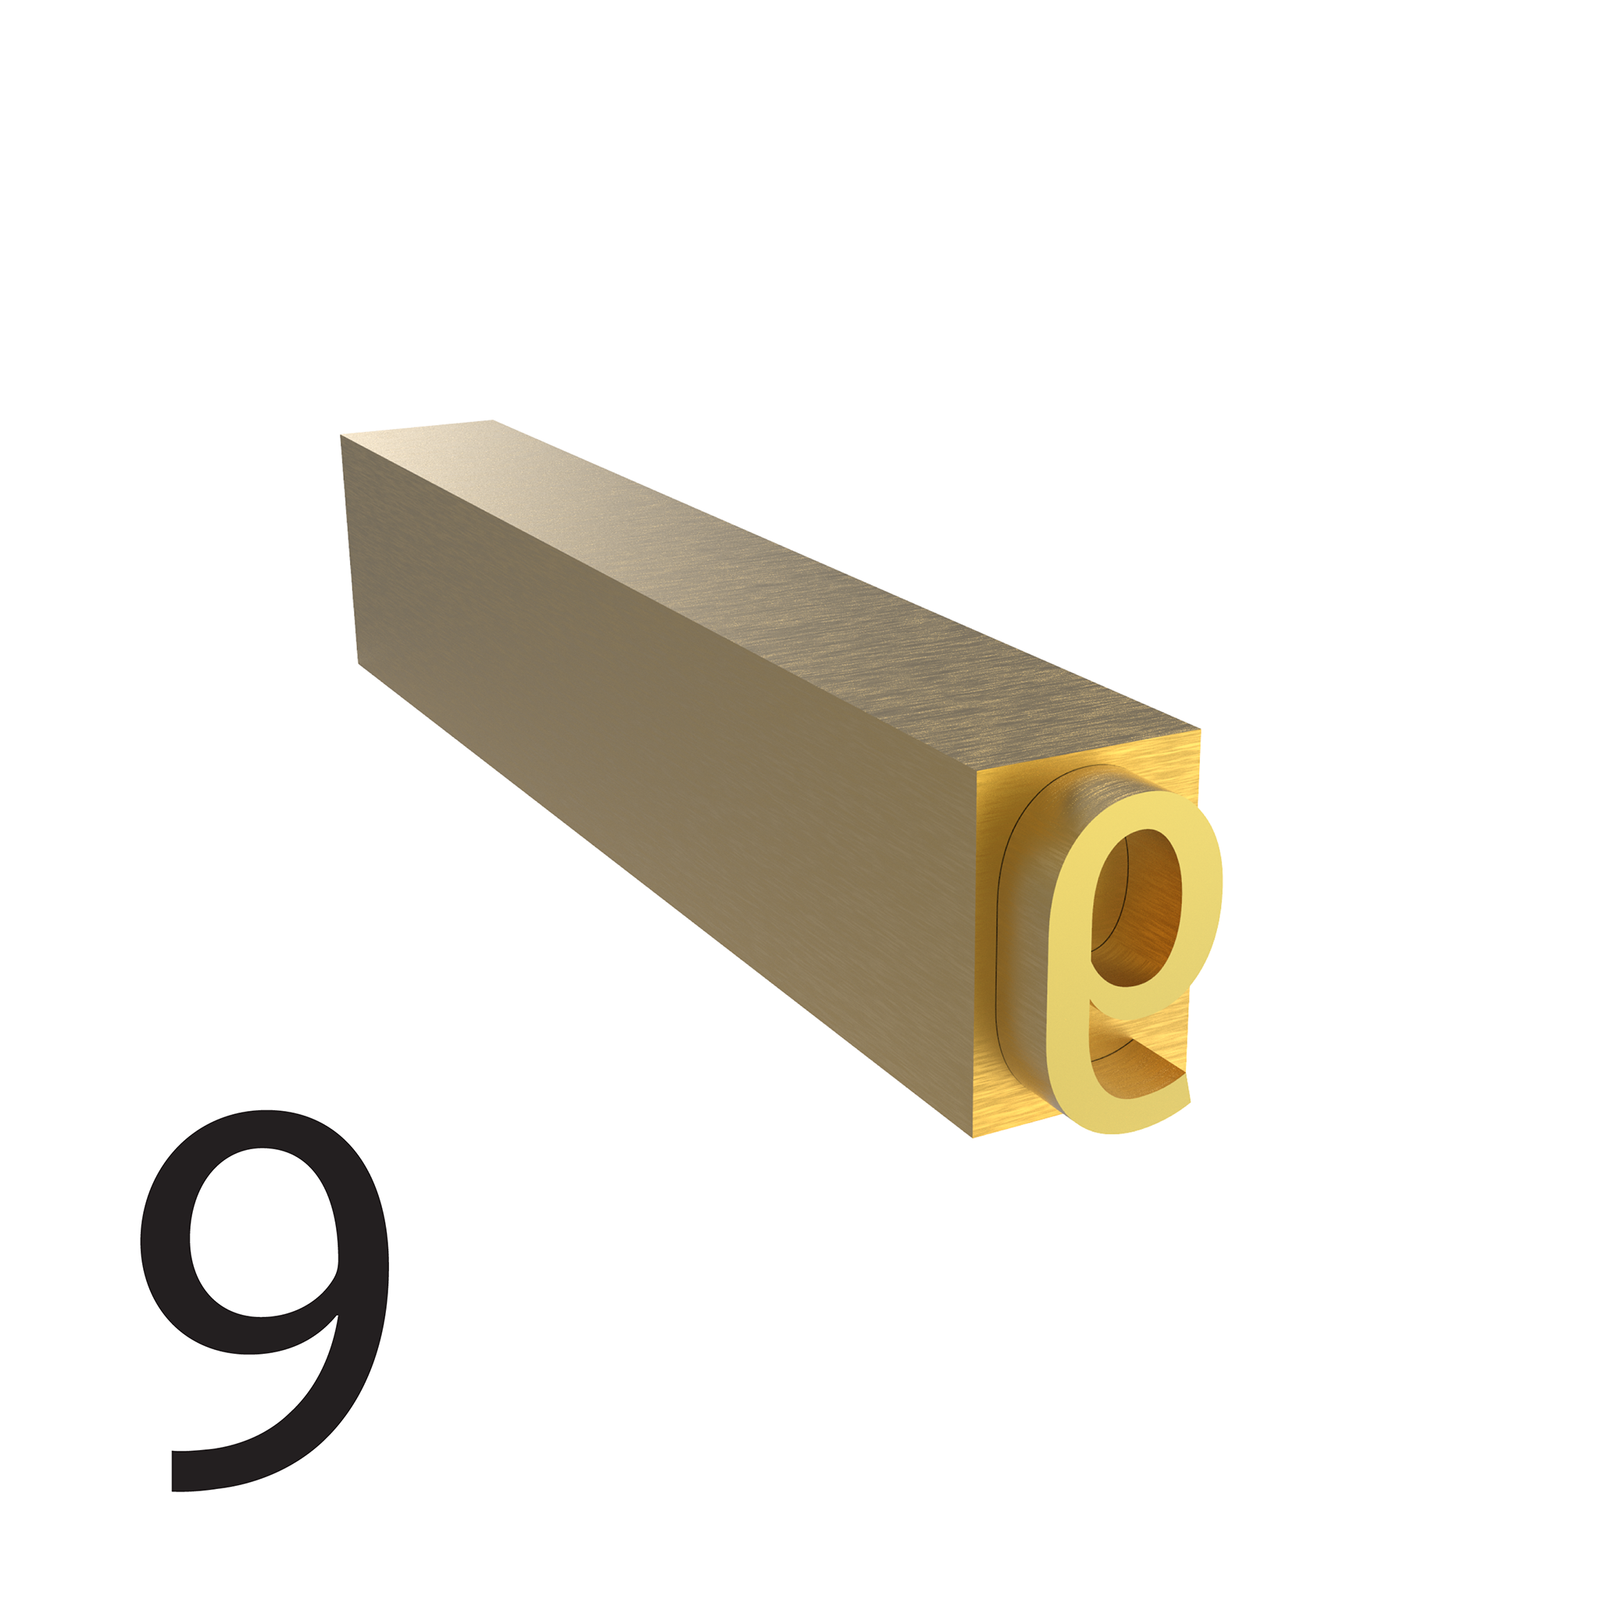 4mm hot stamp number 9 type used for coders and printers